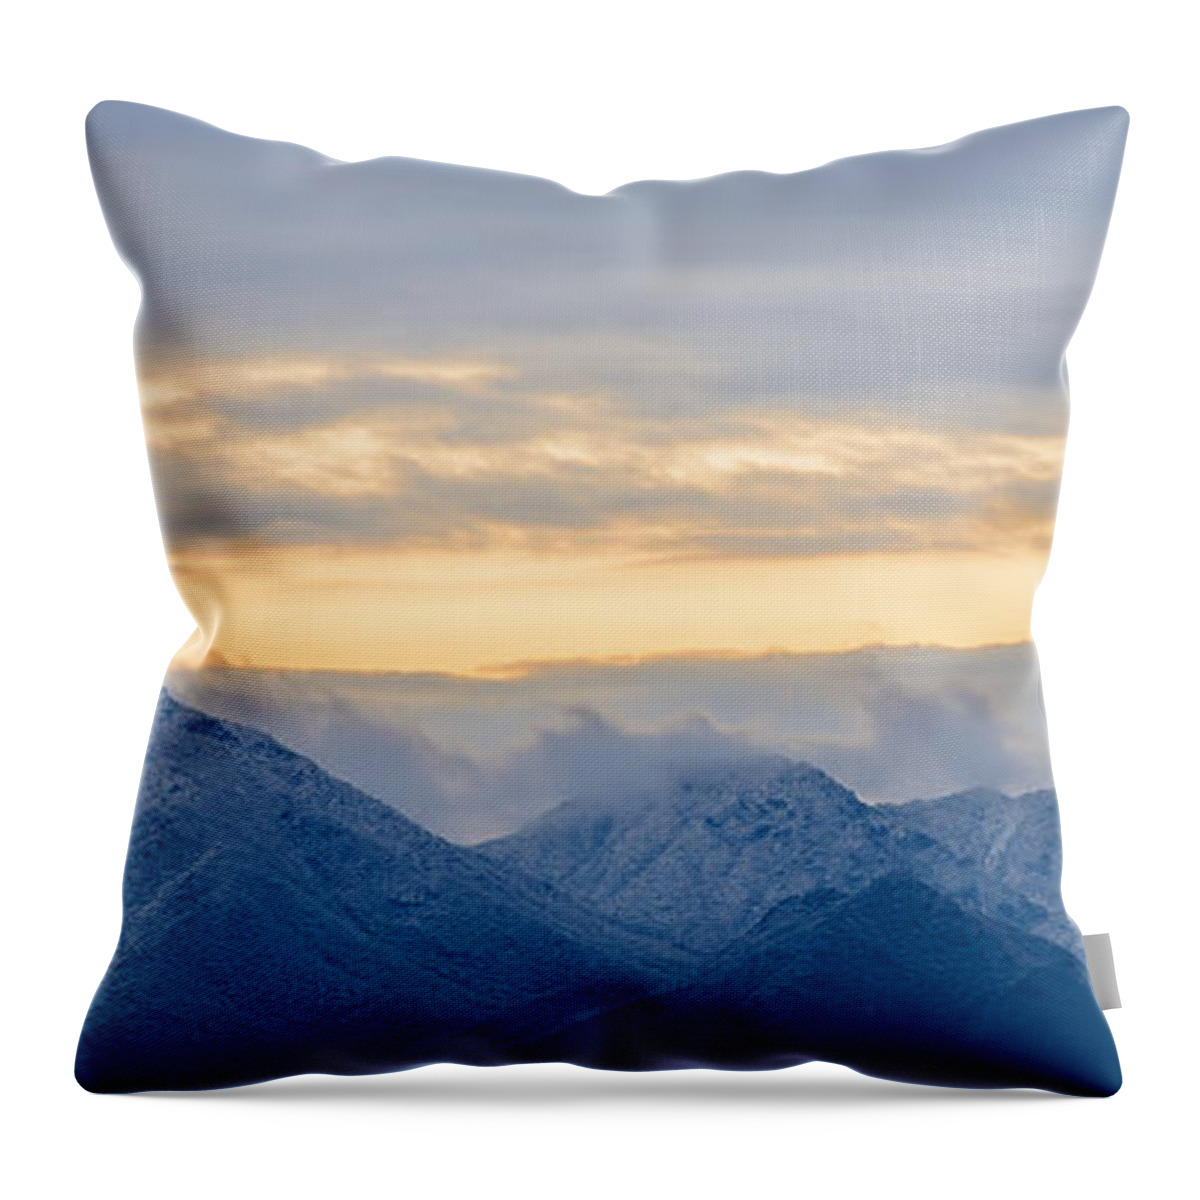 Mcdowell Mountains Throw Pillow featuring the photograph Snow Dusted McDowell Mountains by Tamara Becker